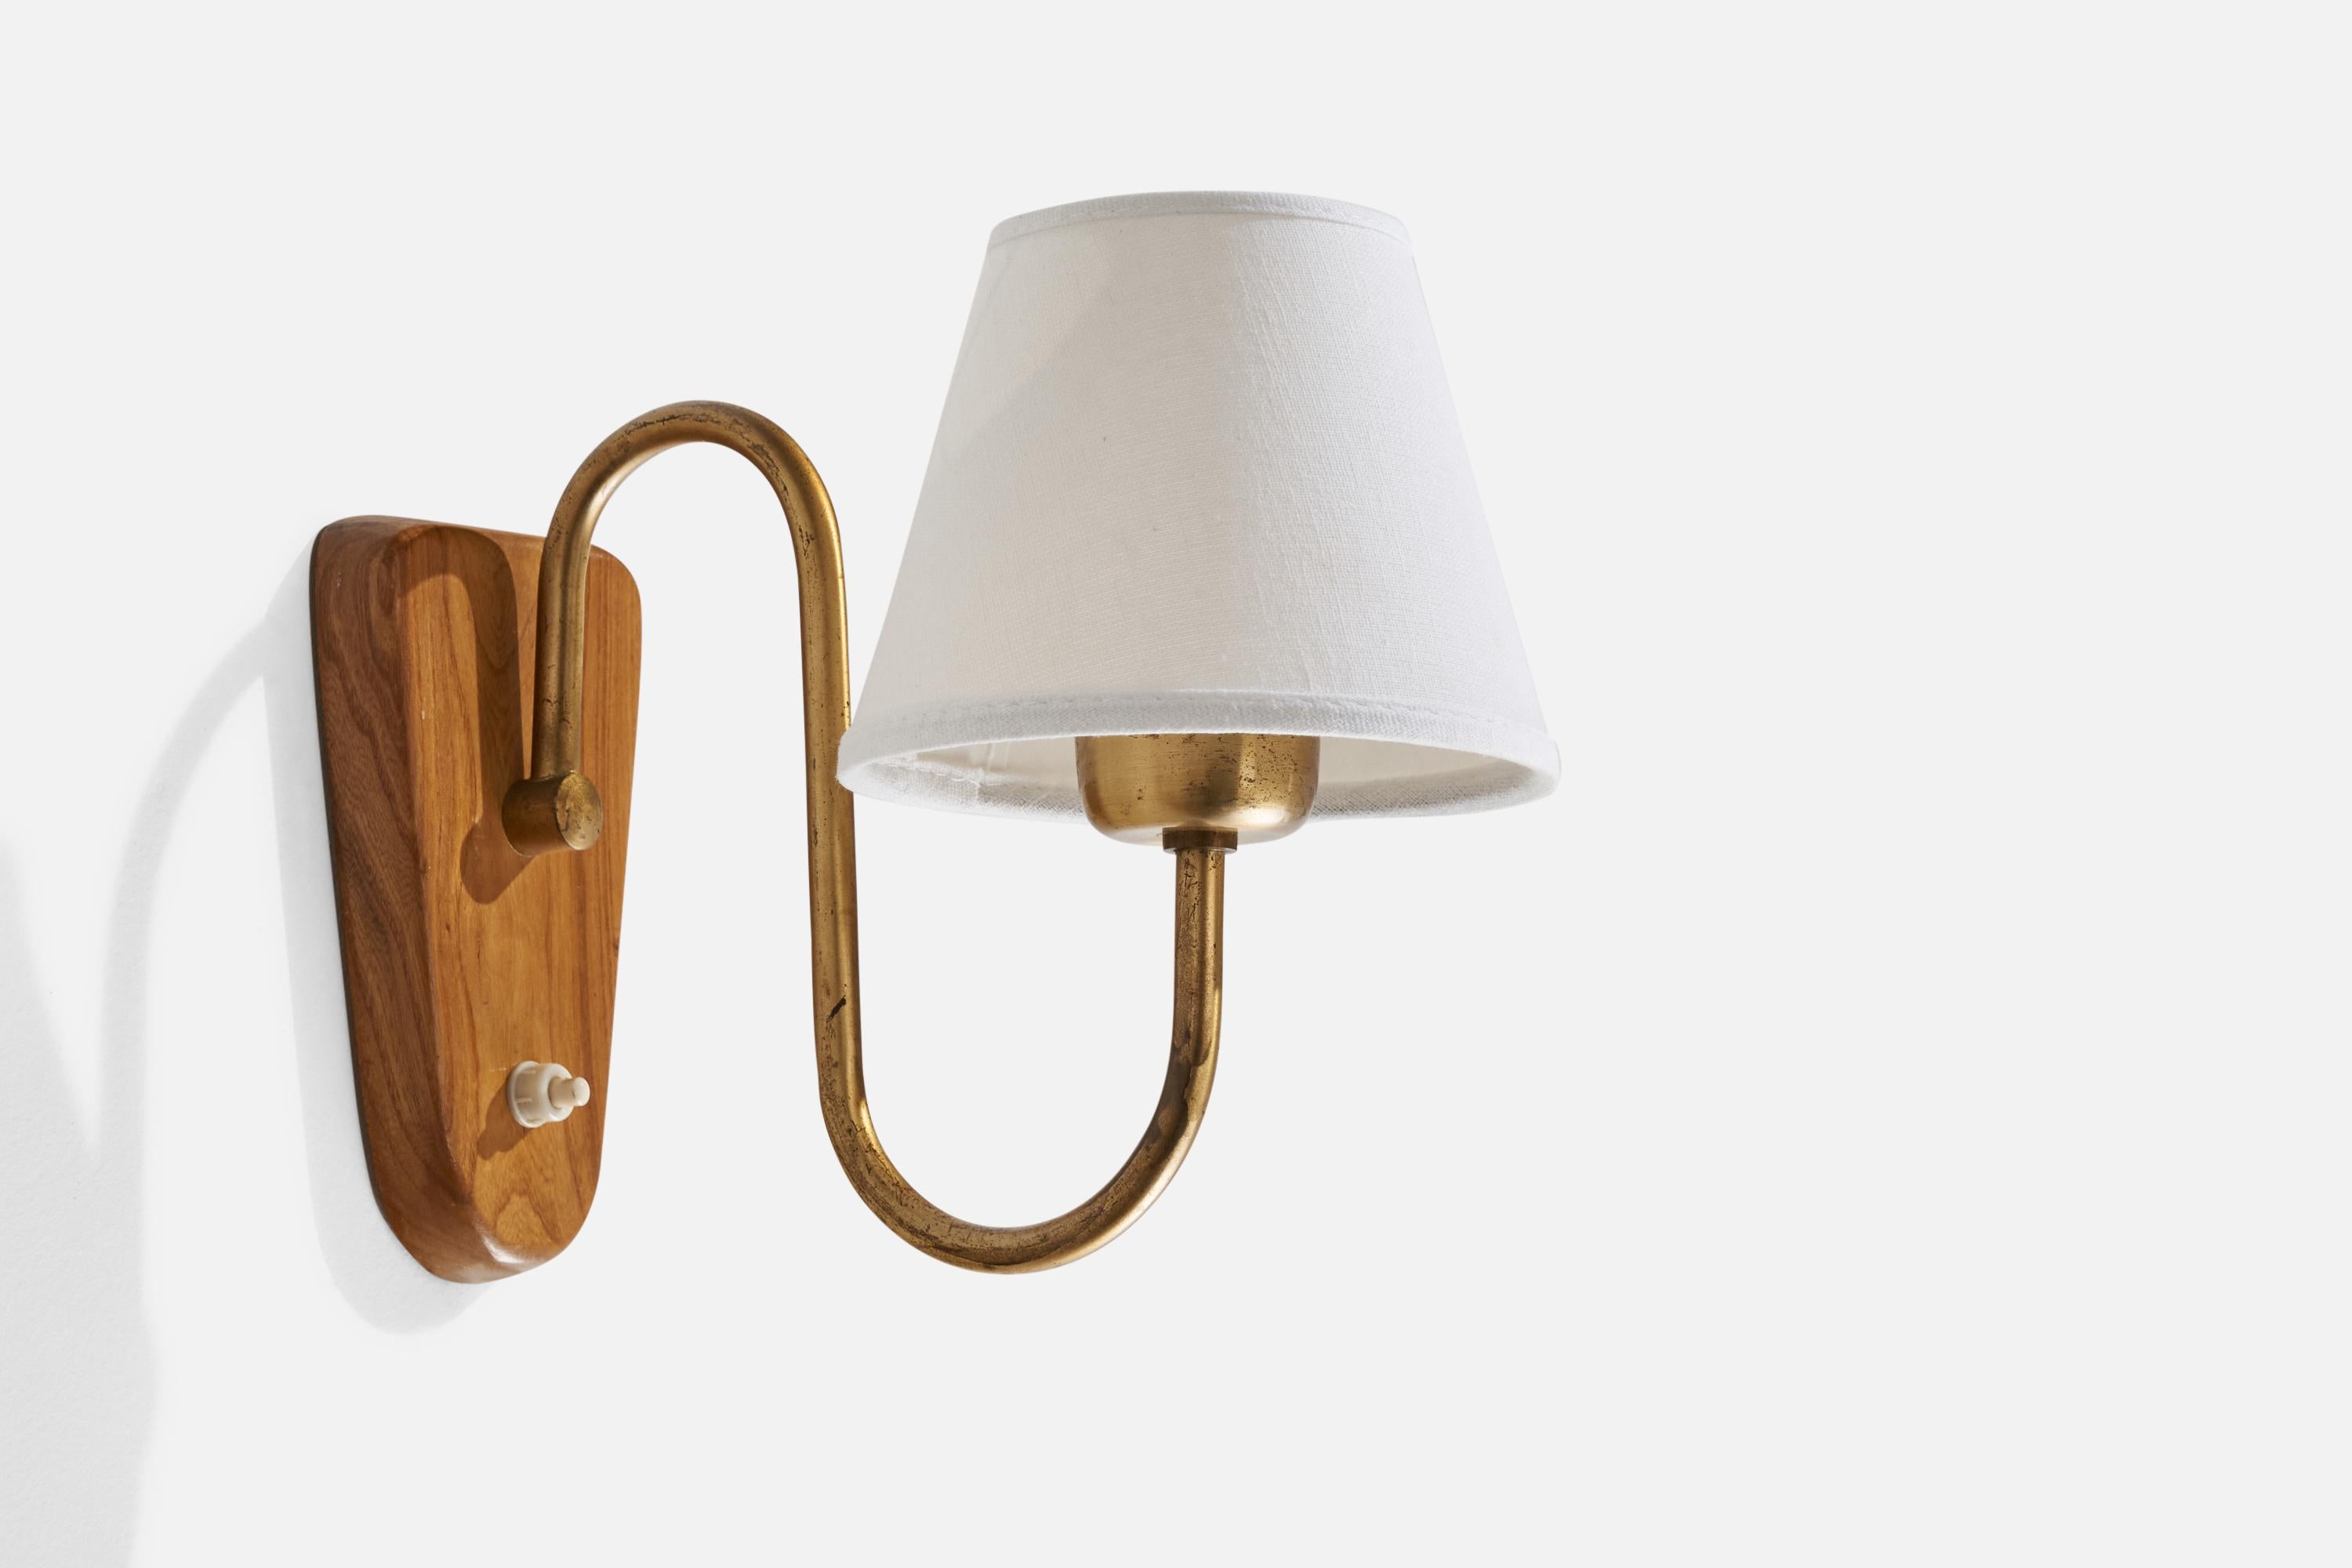 A brass, elm and white fabric wall light designed and produced in Sweden, 1940s.

Overall Dimensions (inches): 9” H x 5.75” W x 9.5” D
Back Plate Dimensions (inches): 6.25” H x 3.64” W x 0.73” D
Bulb Specifications: E-26 Bulb
Number of Sockets: